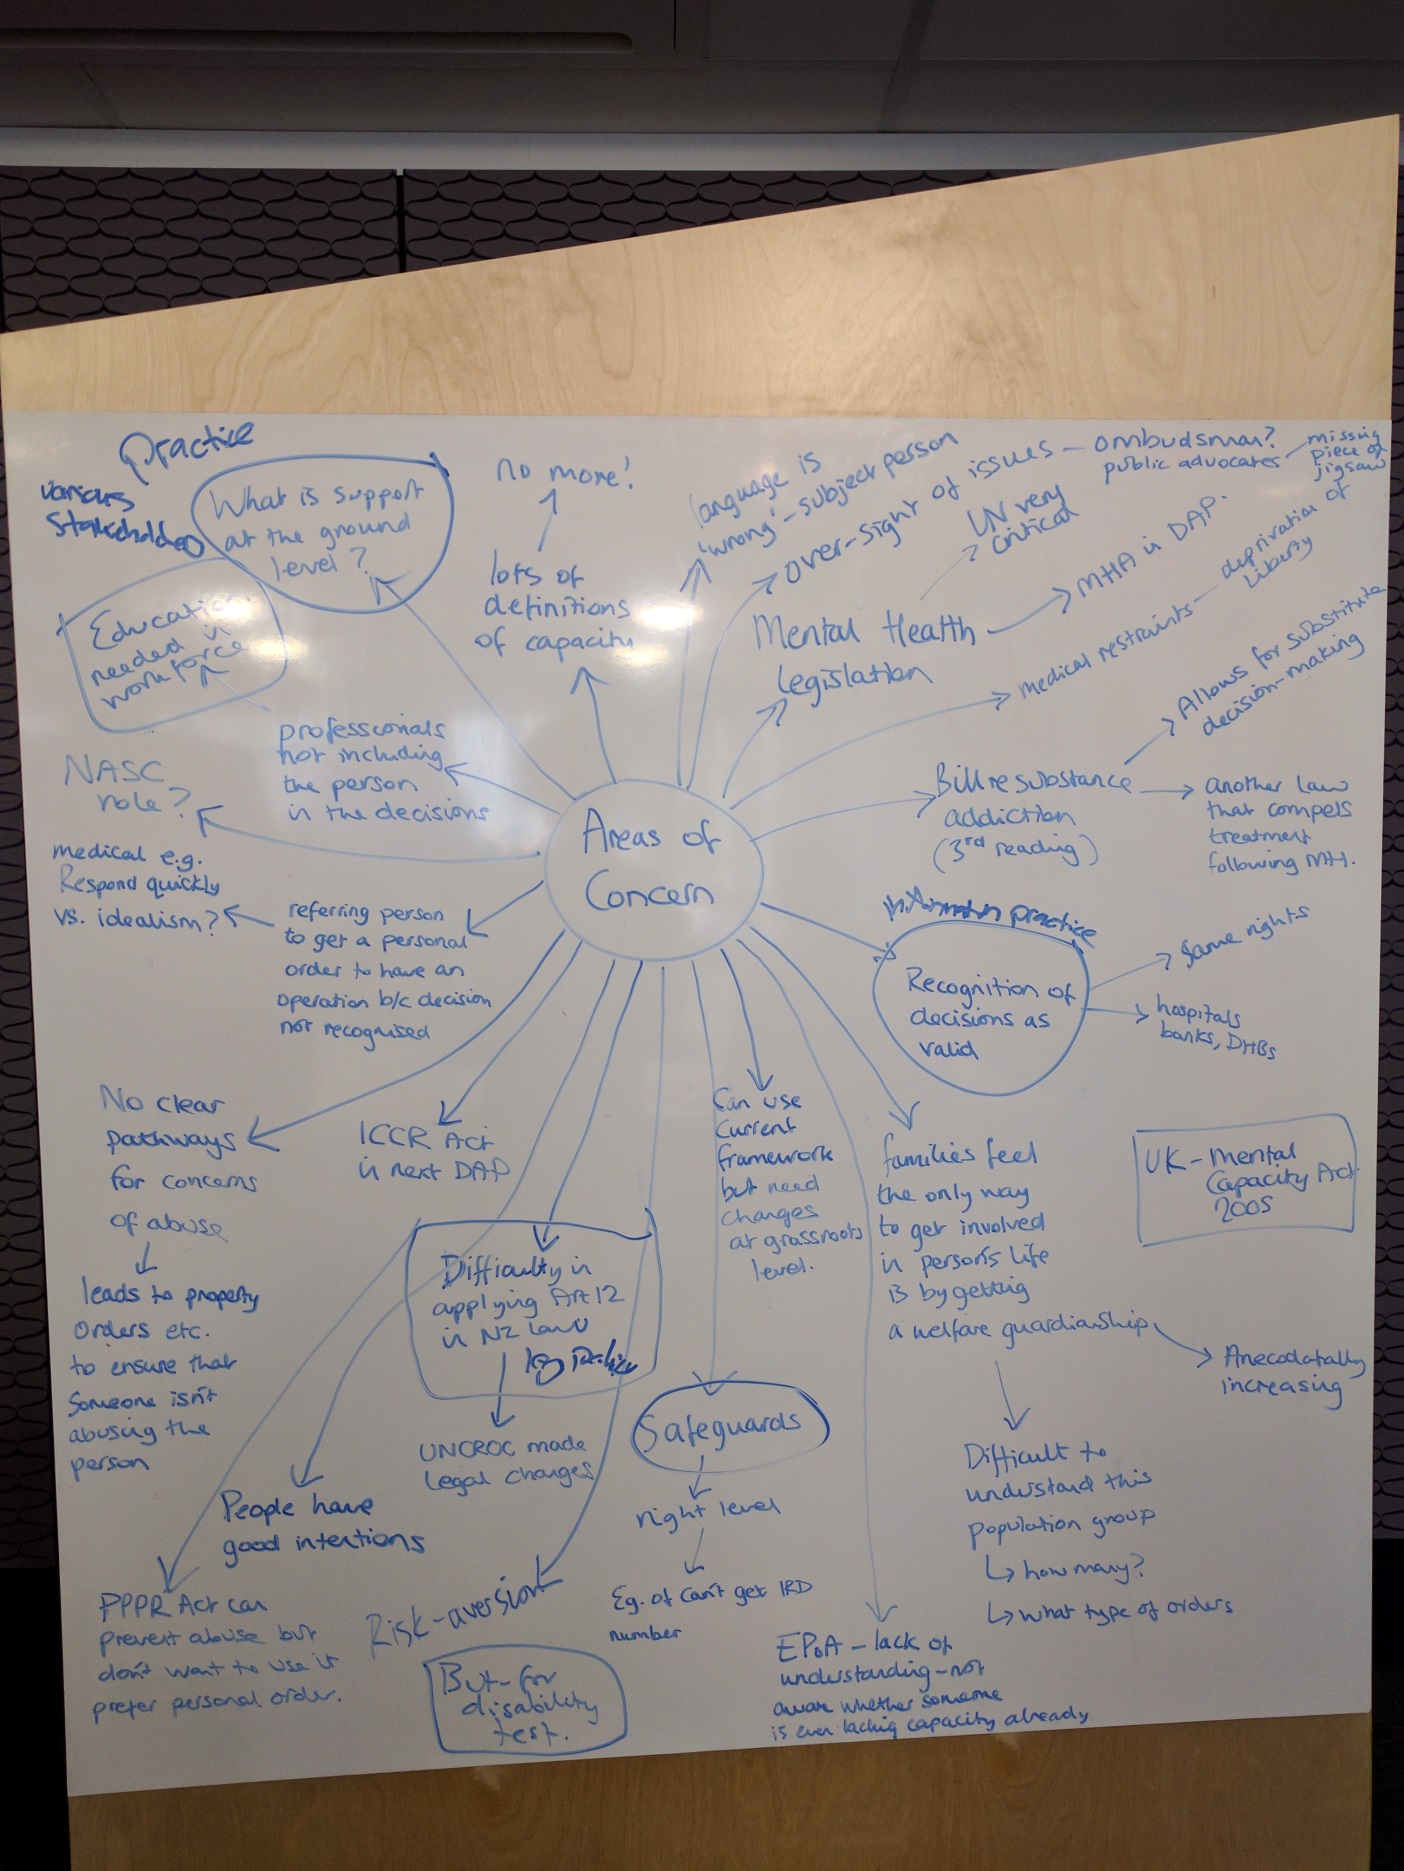 NZ ODI whiteboard capture of areas of concern on legal capacity issues